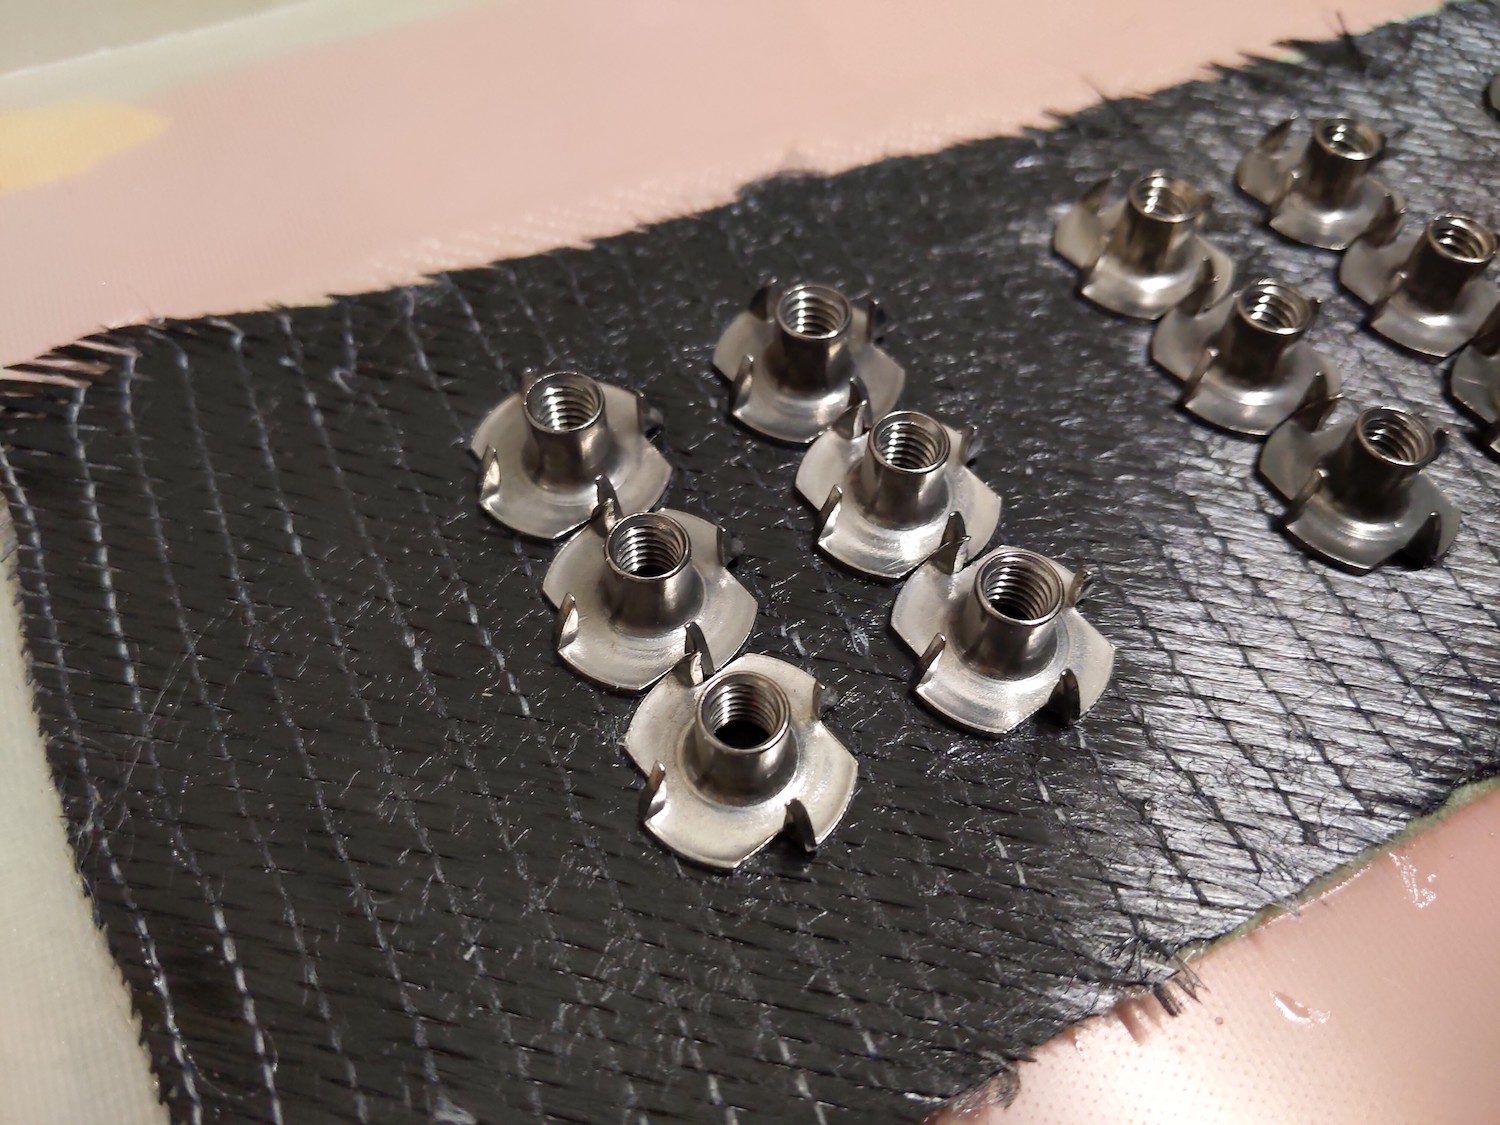 6 stainless seel drive-in nuts glued to carbon 3/3